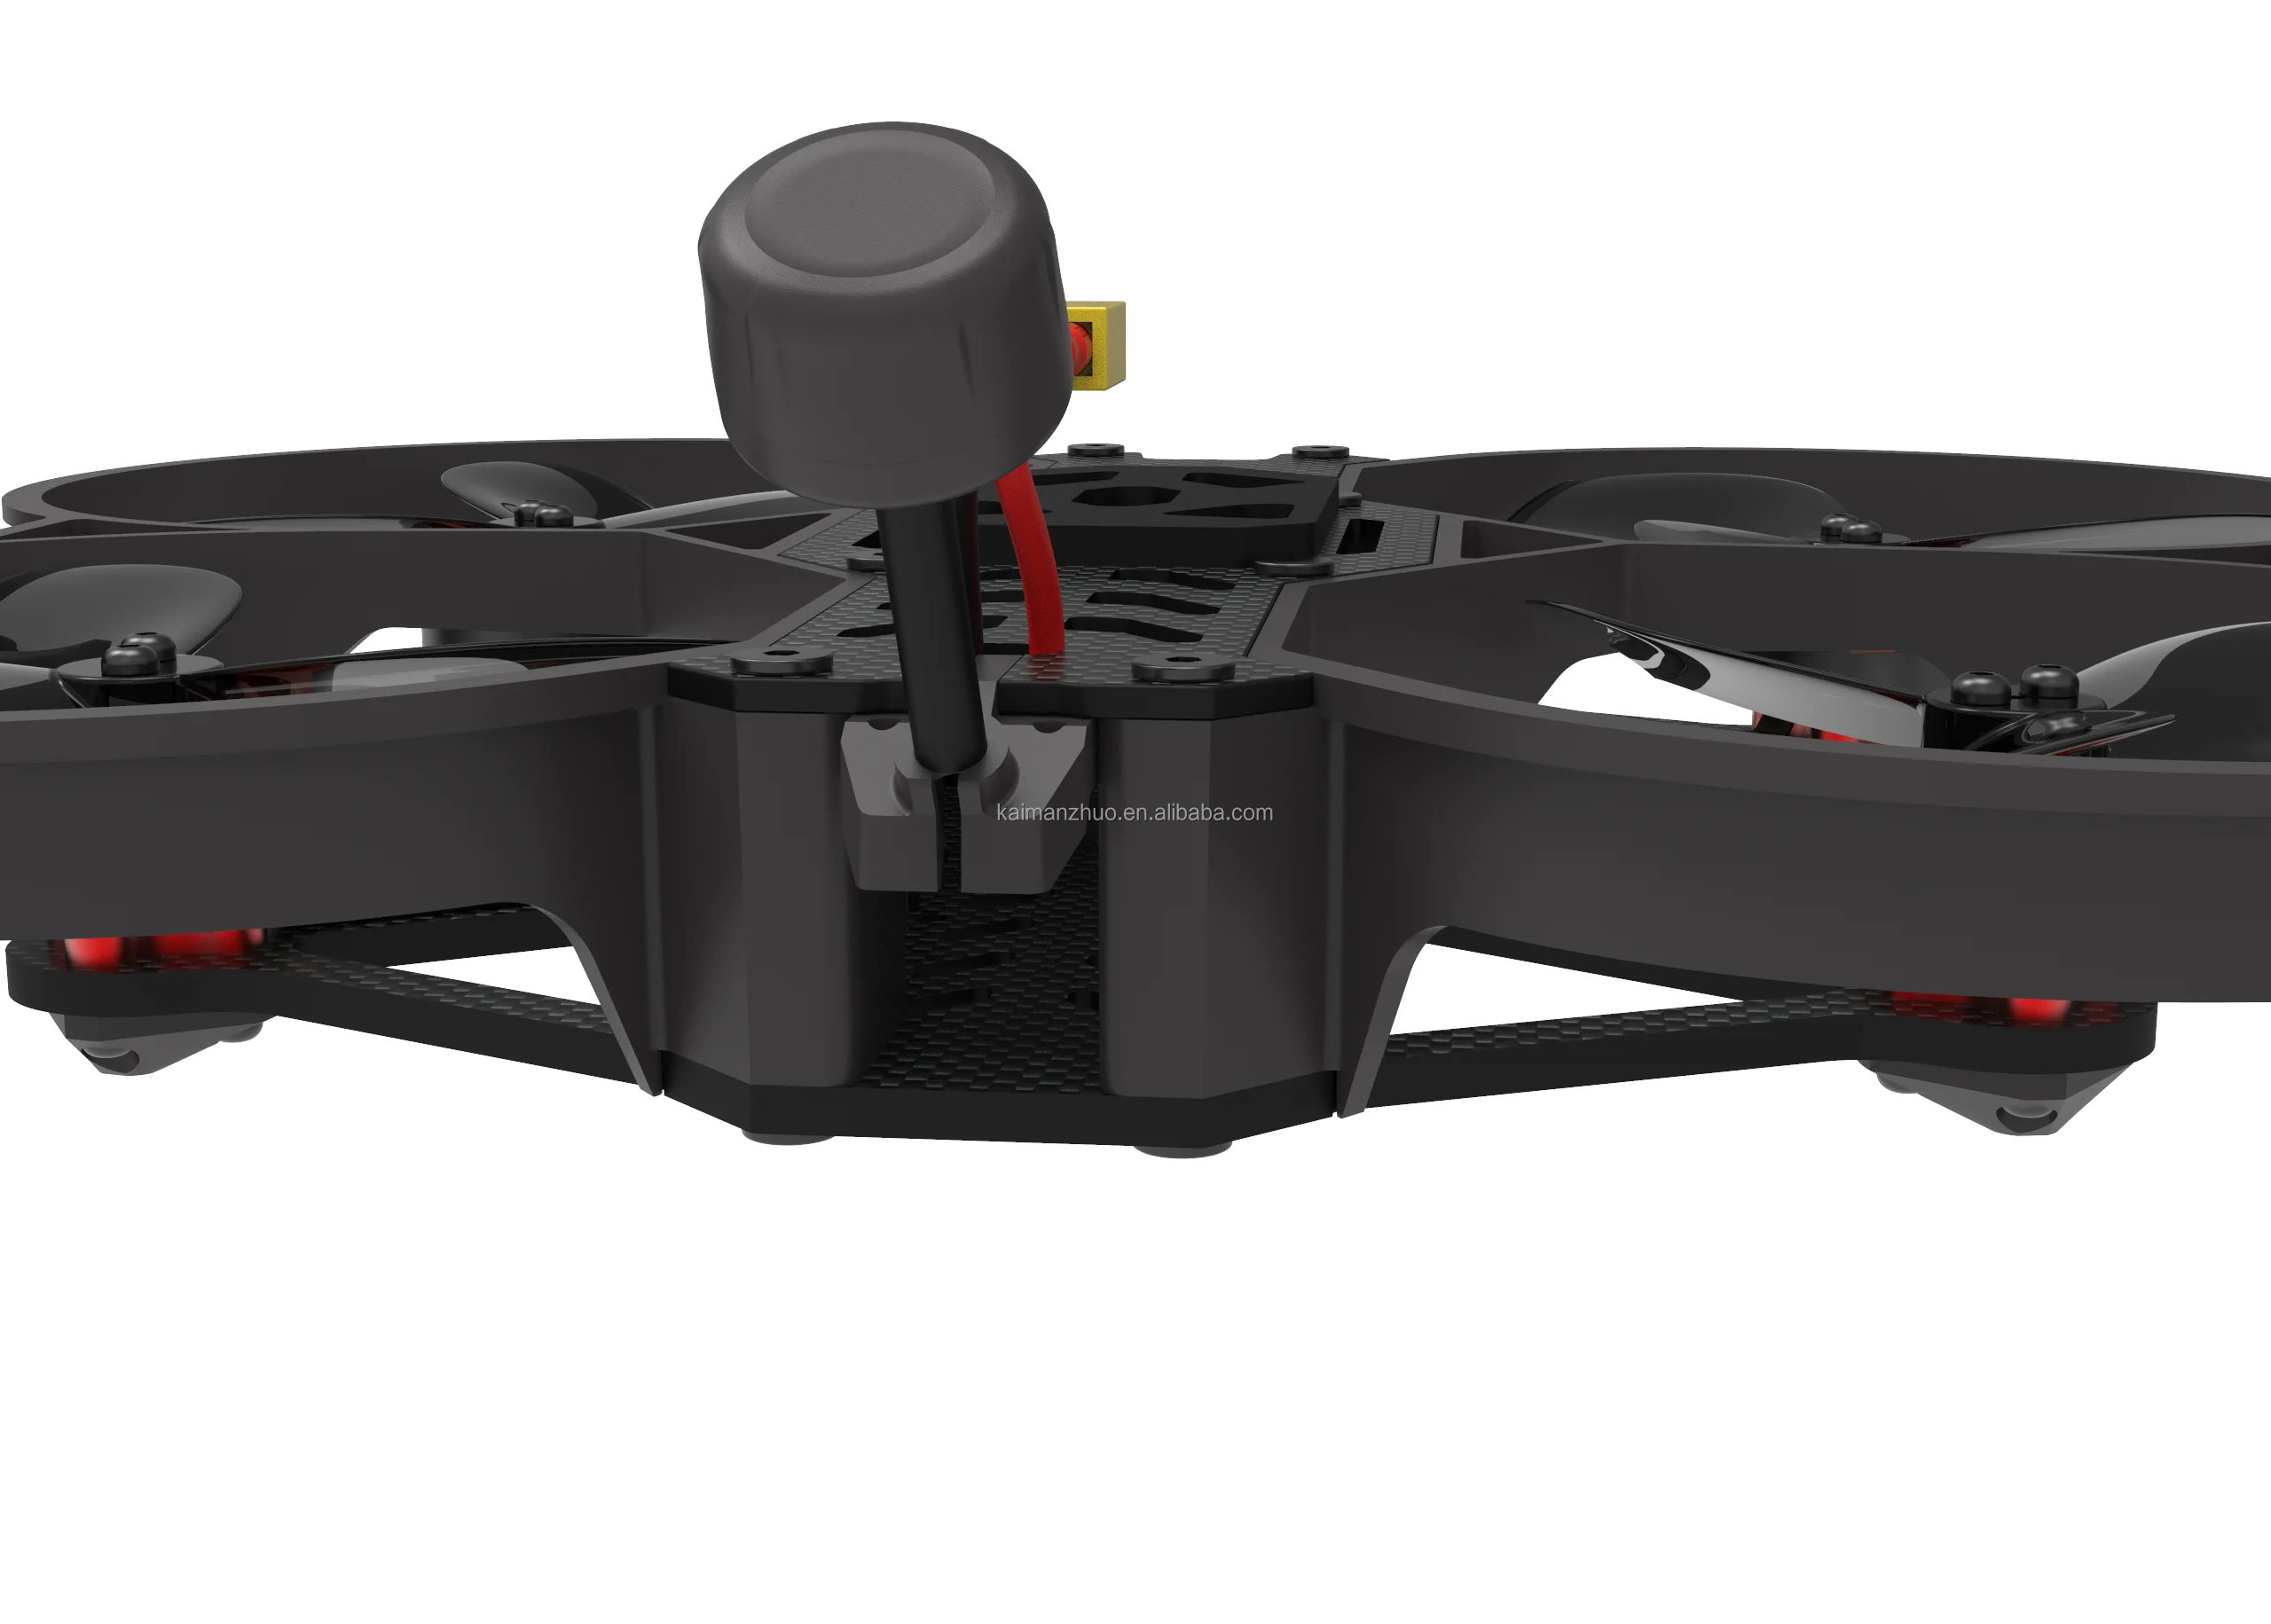 ATOMRC Seagull RTF, you can mount a GoPro on this drone for capturing stunning cinematic footage .